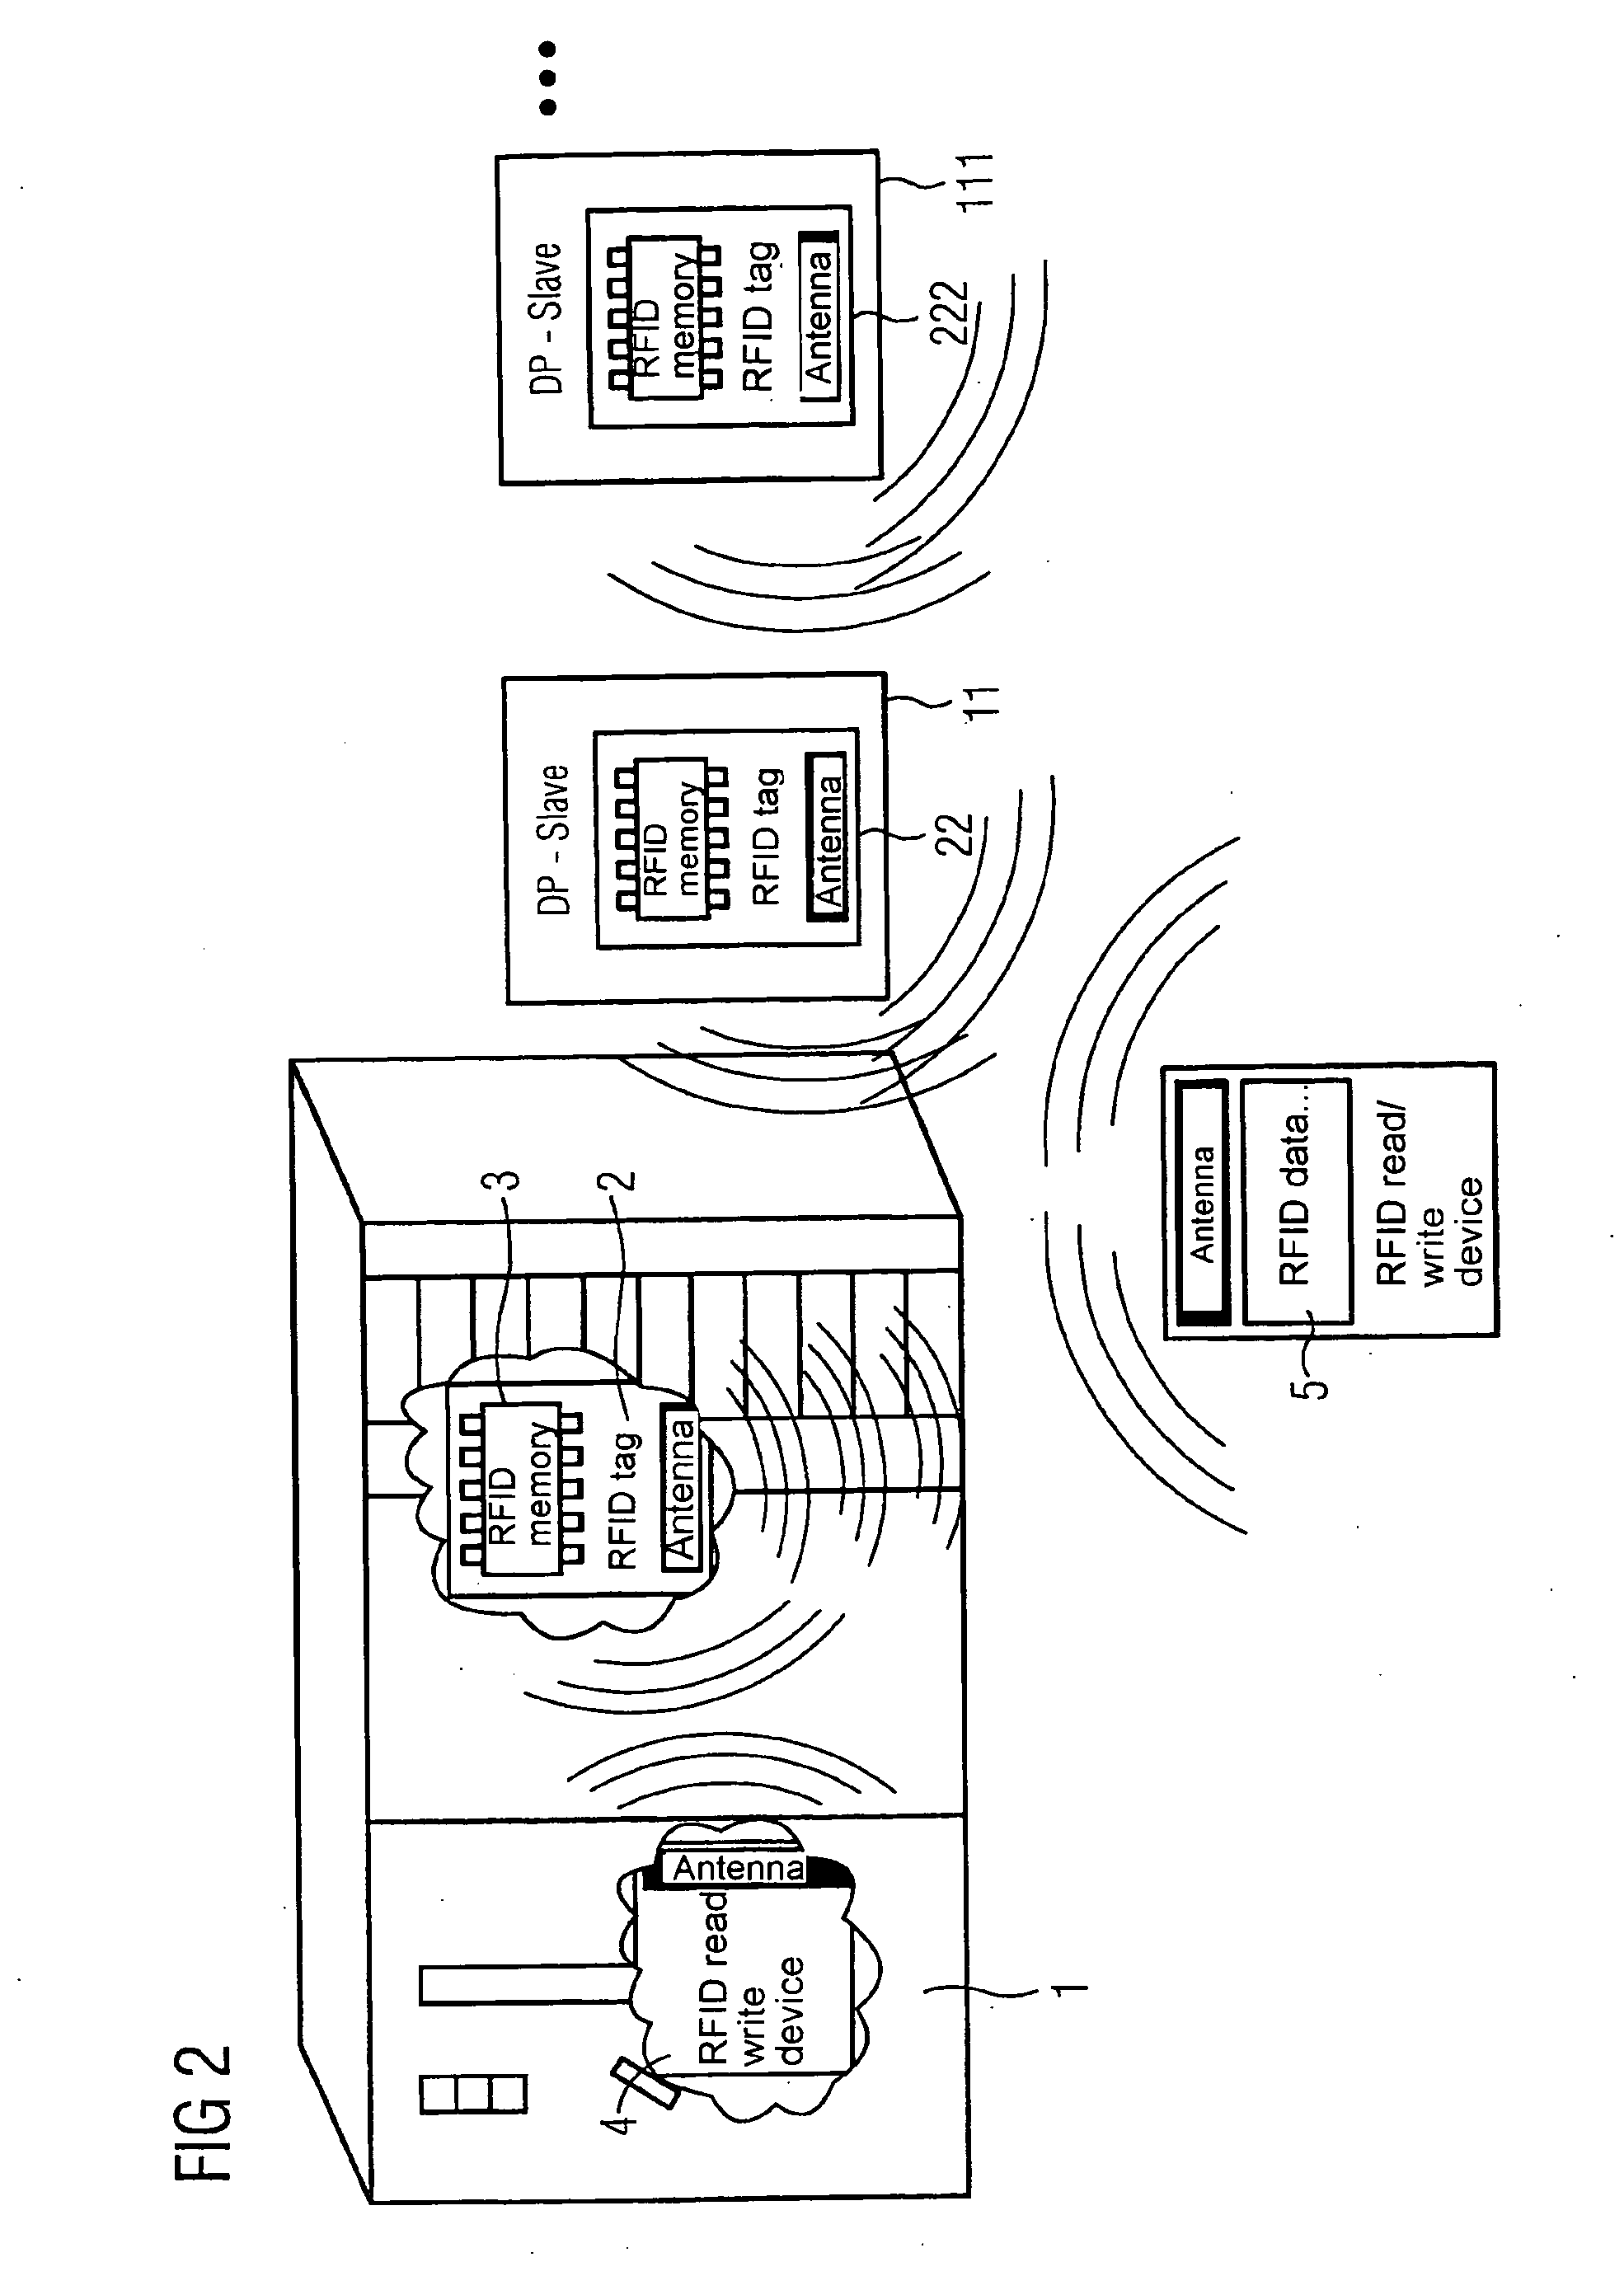 Transmission of data into and out of automation components